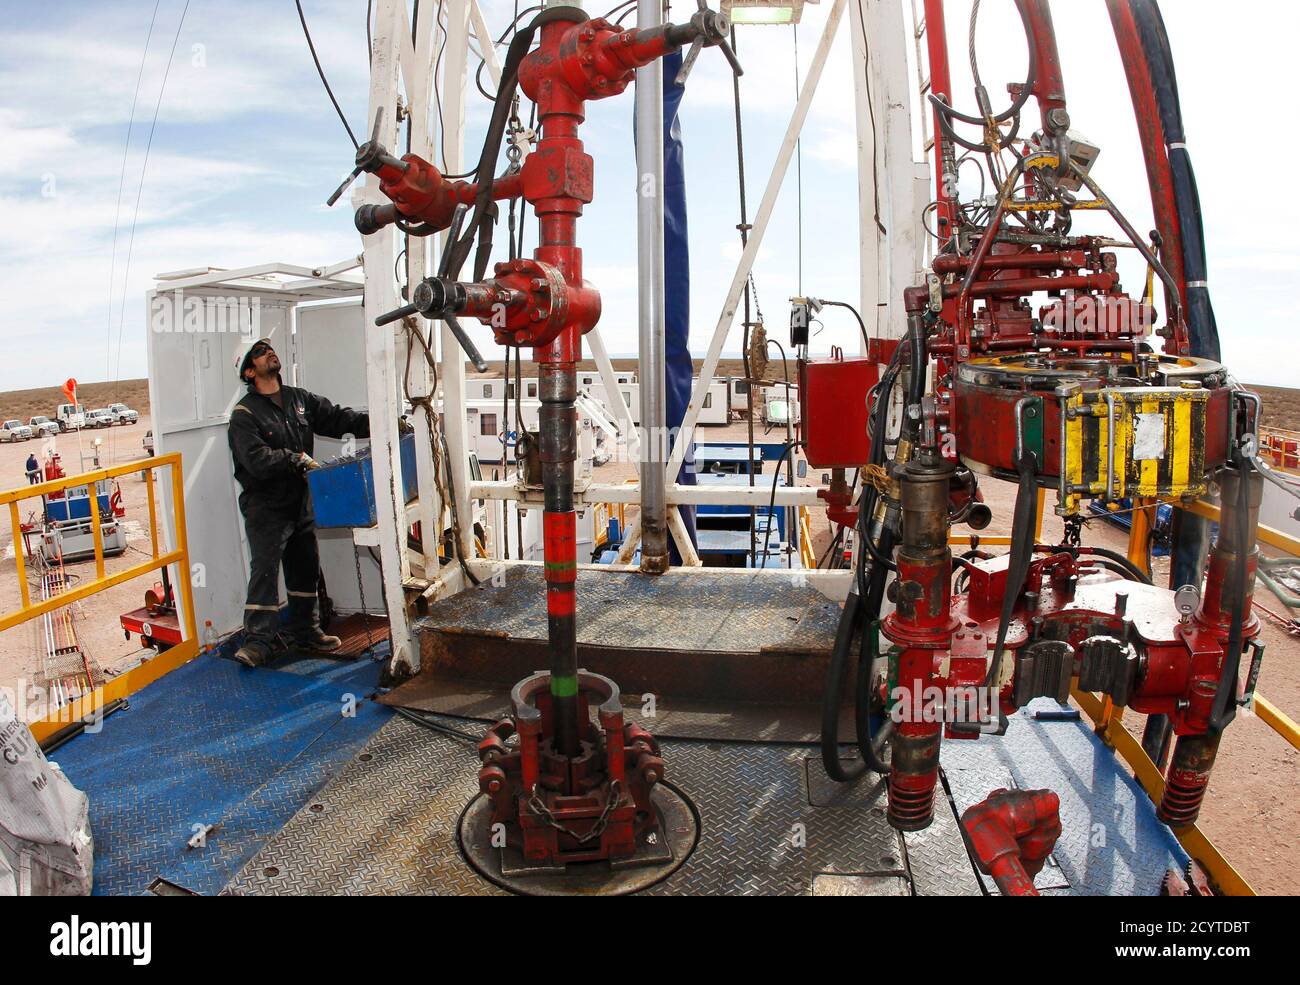 A technician works at a rotary table of a gas and oil drilling rig in the  Patagonian province of Neuquen October 14, 2011. The Patagonia landscape,  which was transformed through the discovery